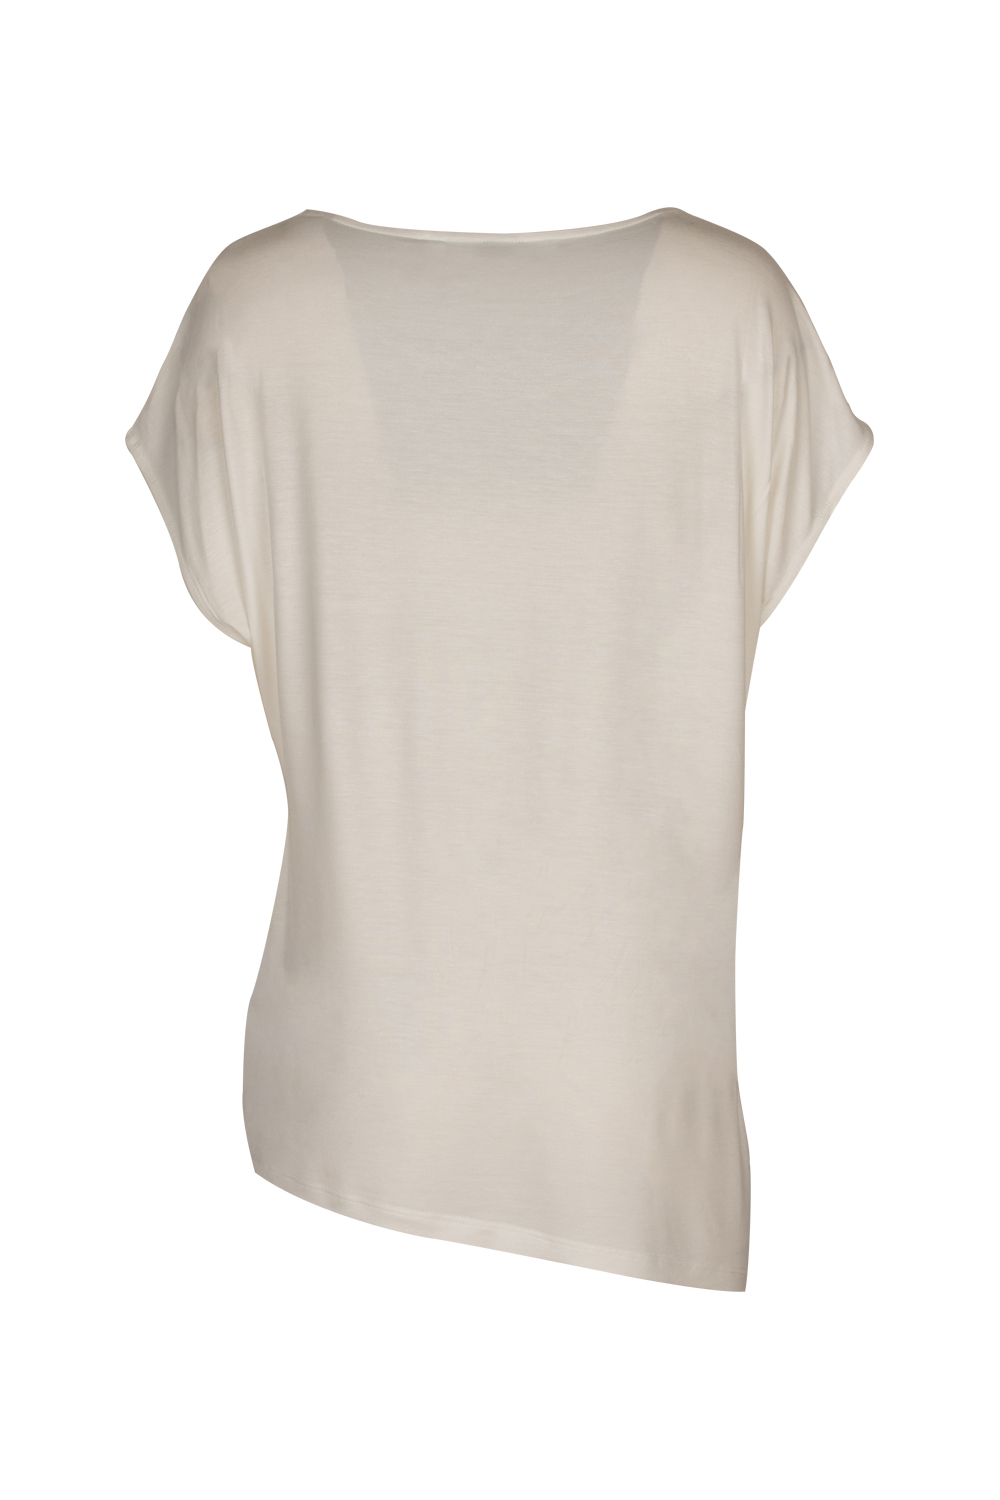 Asymmetric Double Textured Blouse with Frayed Neck Detail